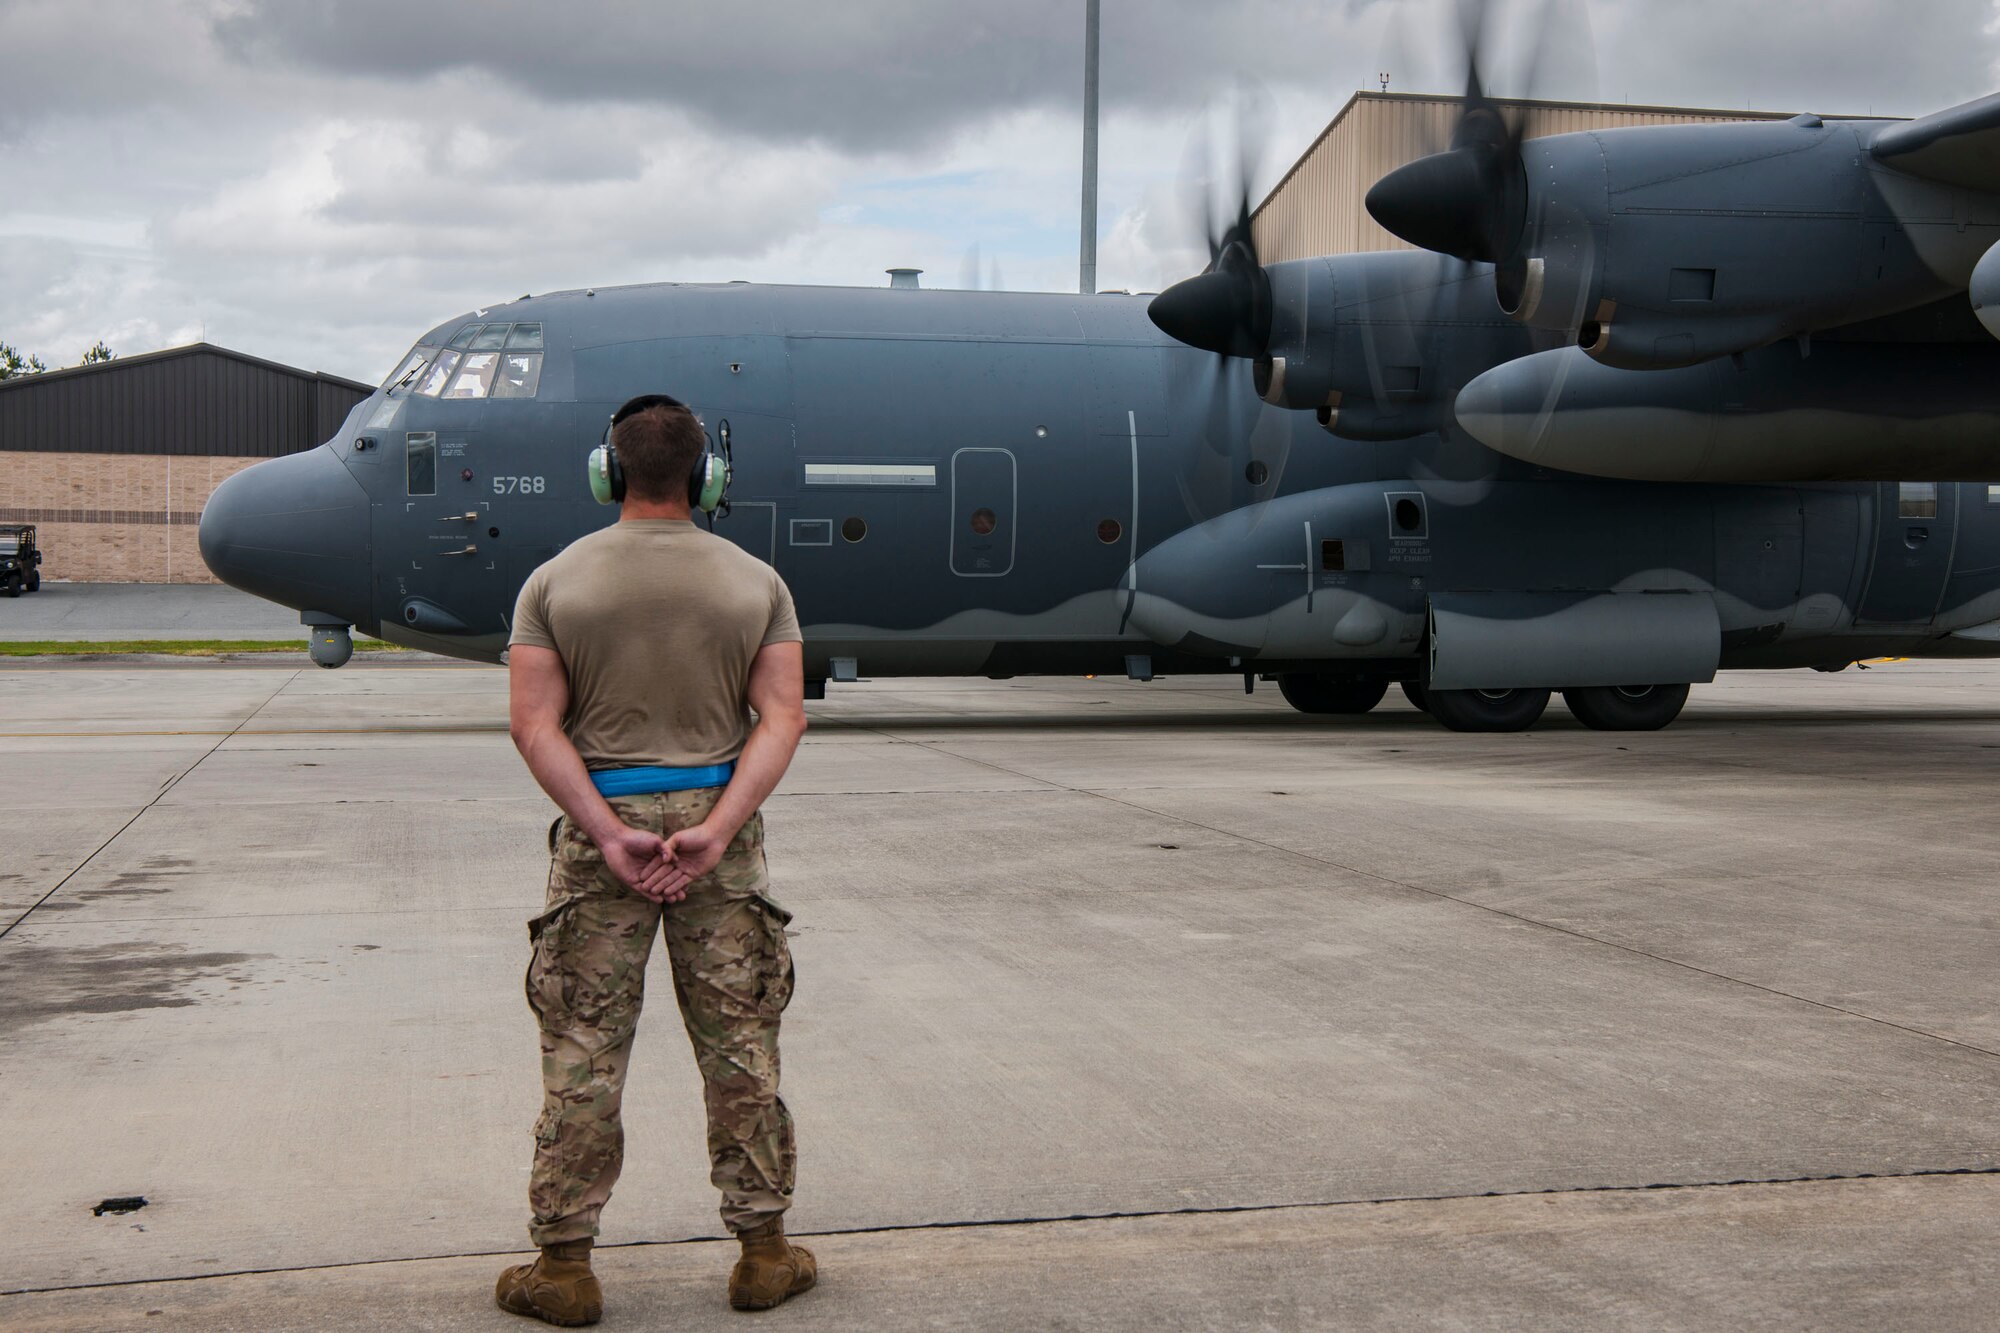 A HC-130J combat King II prepares to take off for relocation in anticipation of Hurricane Michael, Oct. 9, 2018, at Moody Air Force Base, Ga. While it is expected to be a Category 2 upon landfall, the current forecast anticipates Moody and the surrounding area will face tropical-storm-force winds Wednesday afternoon. (U.S. Air Force photo by Airman Taryn Butler)